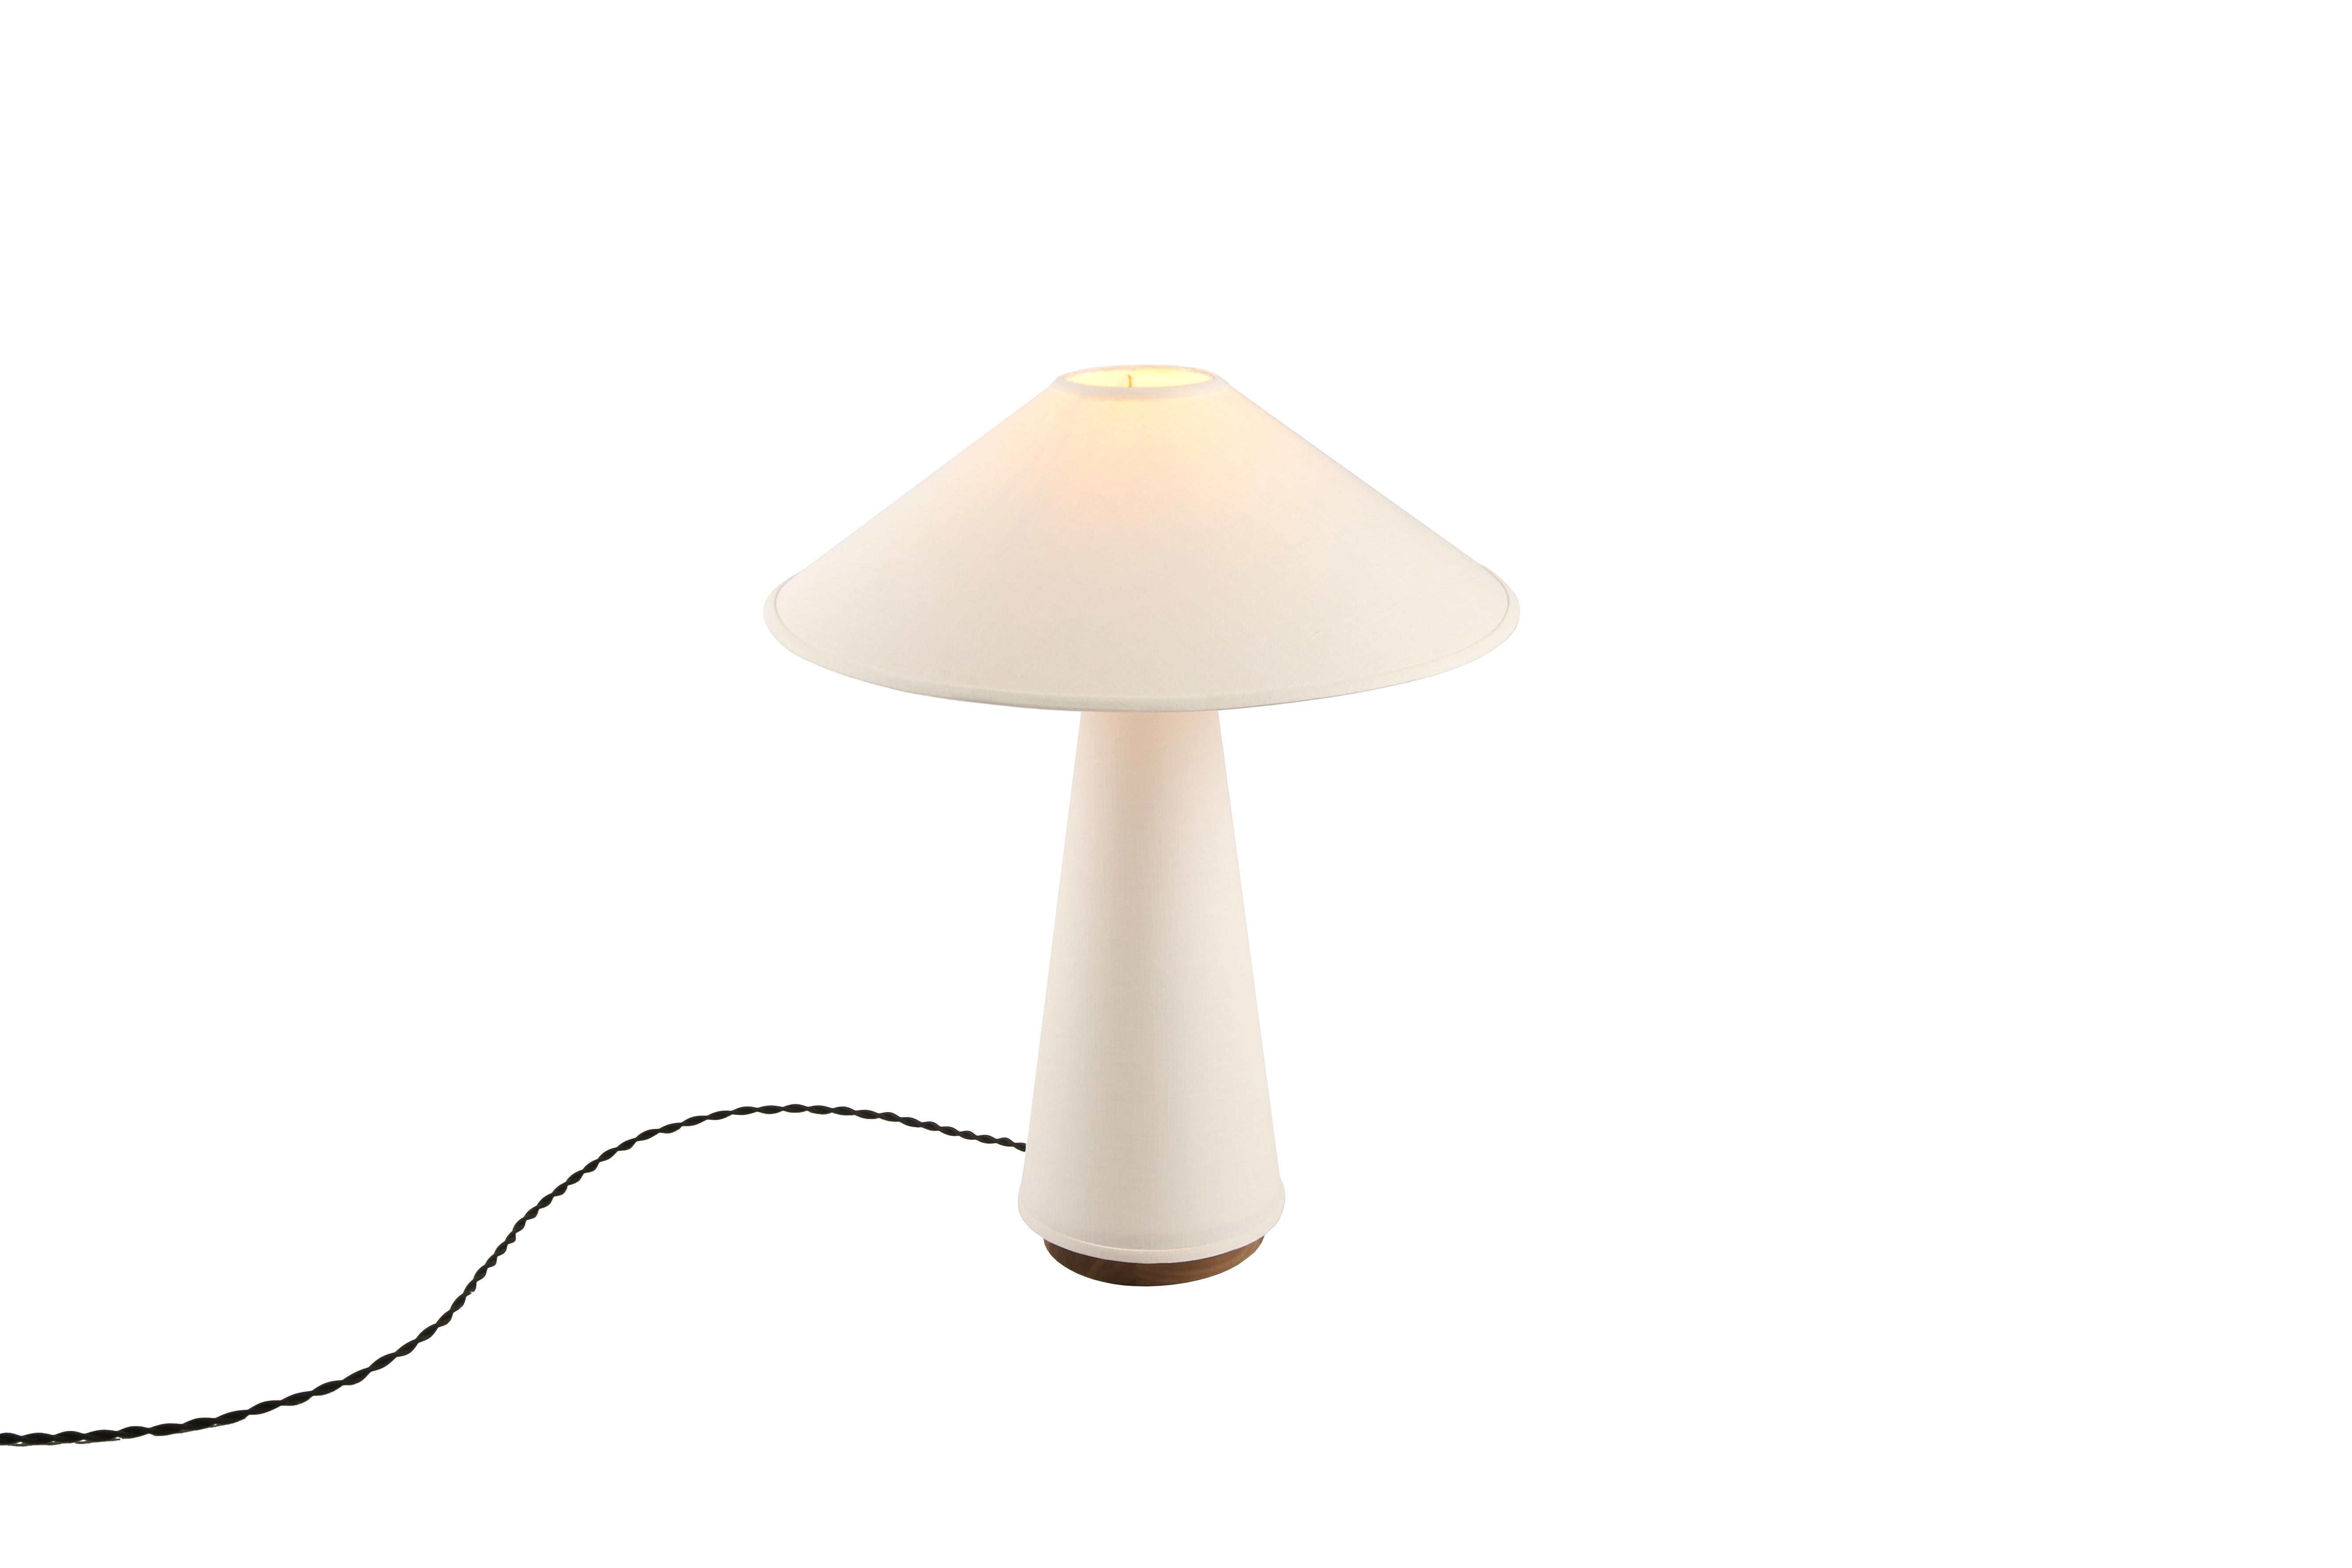 The Linden table lamp features a cream linen shade and lamp body, solid hardwood walnut base, and brass details. The tabletop fixtures reference the Classic profiles and angles of Mid-Century Modern design with distinct clean lines, smooth sweeping